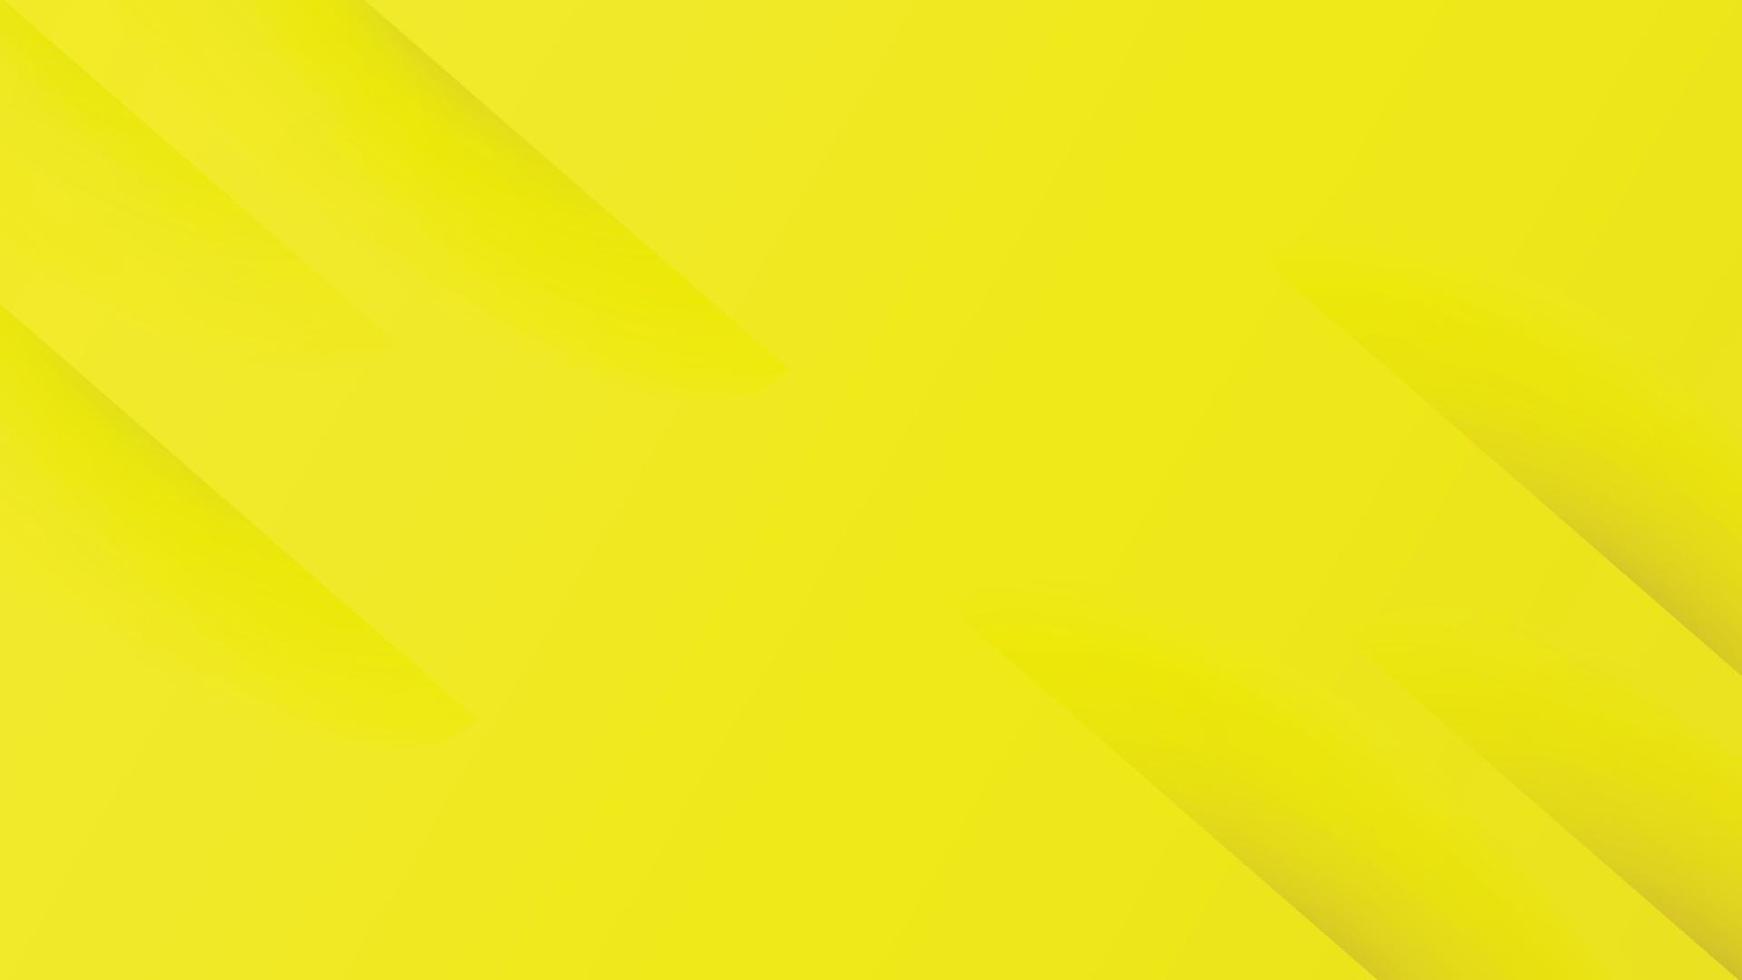 Abstract Gradient Yellow Background with Diagonal Stripes. Can use for cover brochure template, poster, banner web, print ad, etc. Vector illustration